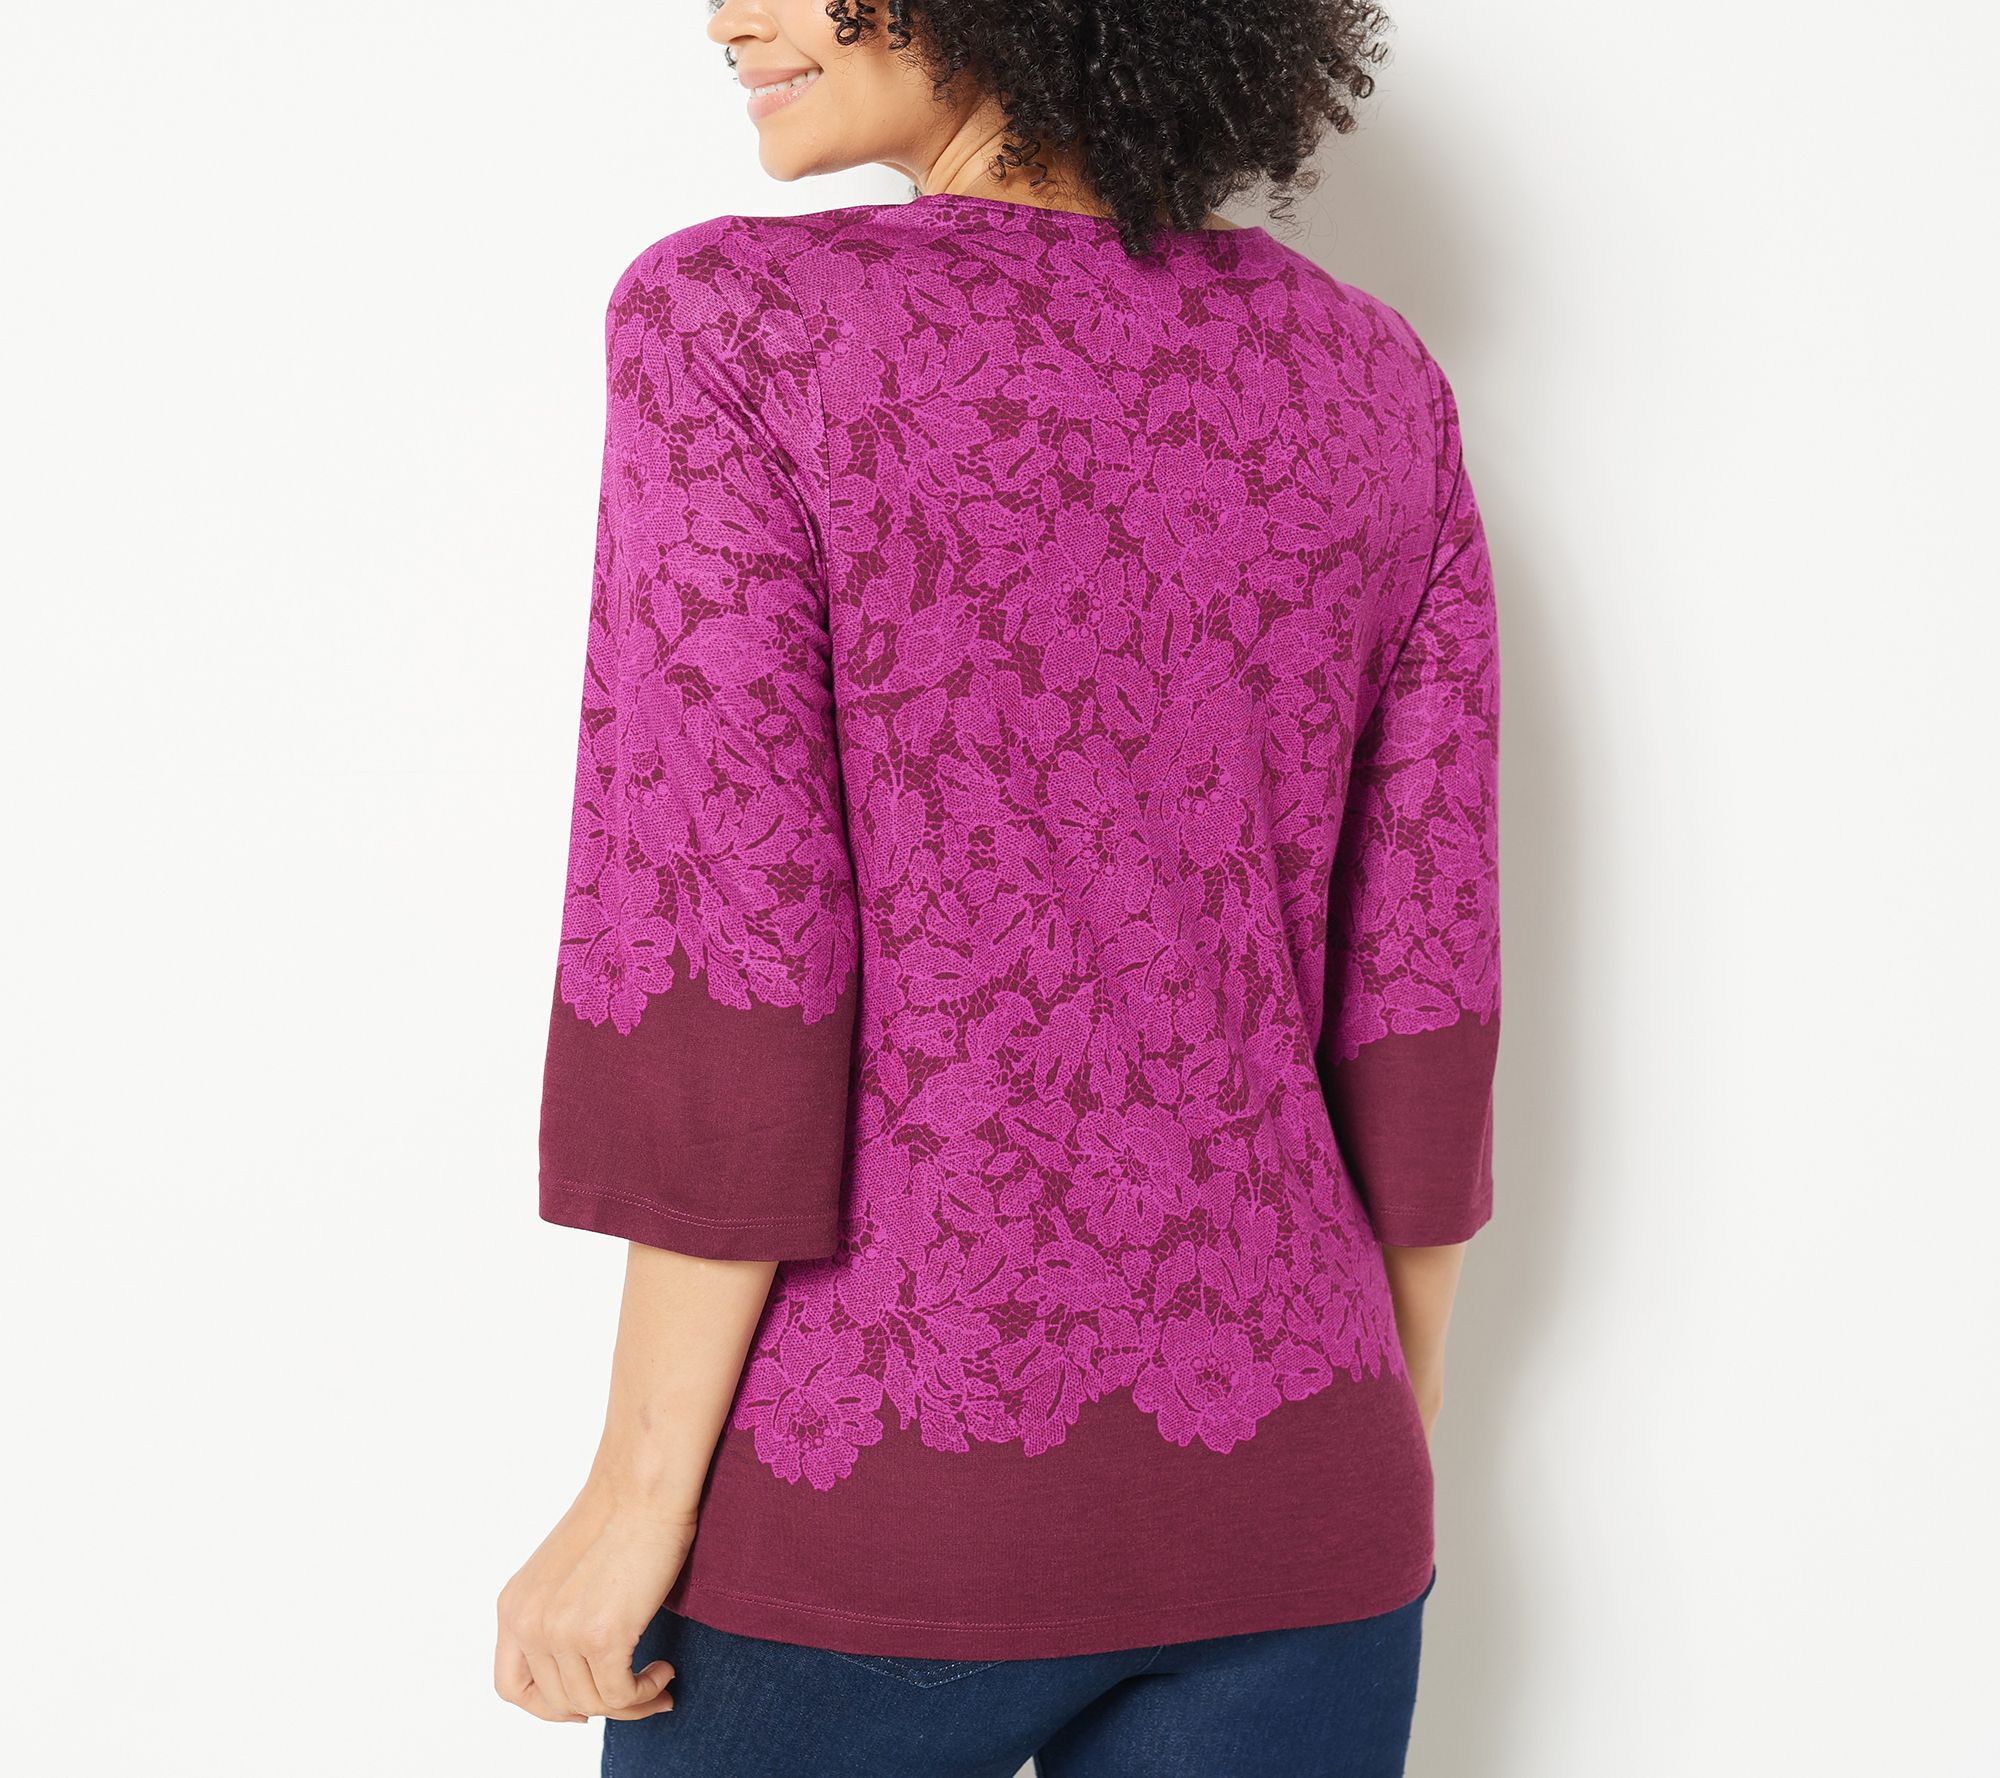 Isaac Mizrahi Live! Printed Lace Top with Bell-Sleeves - QVC.com